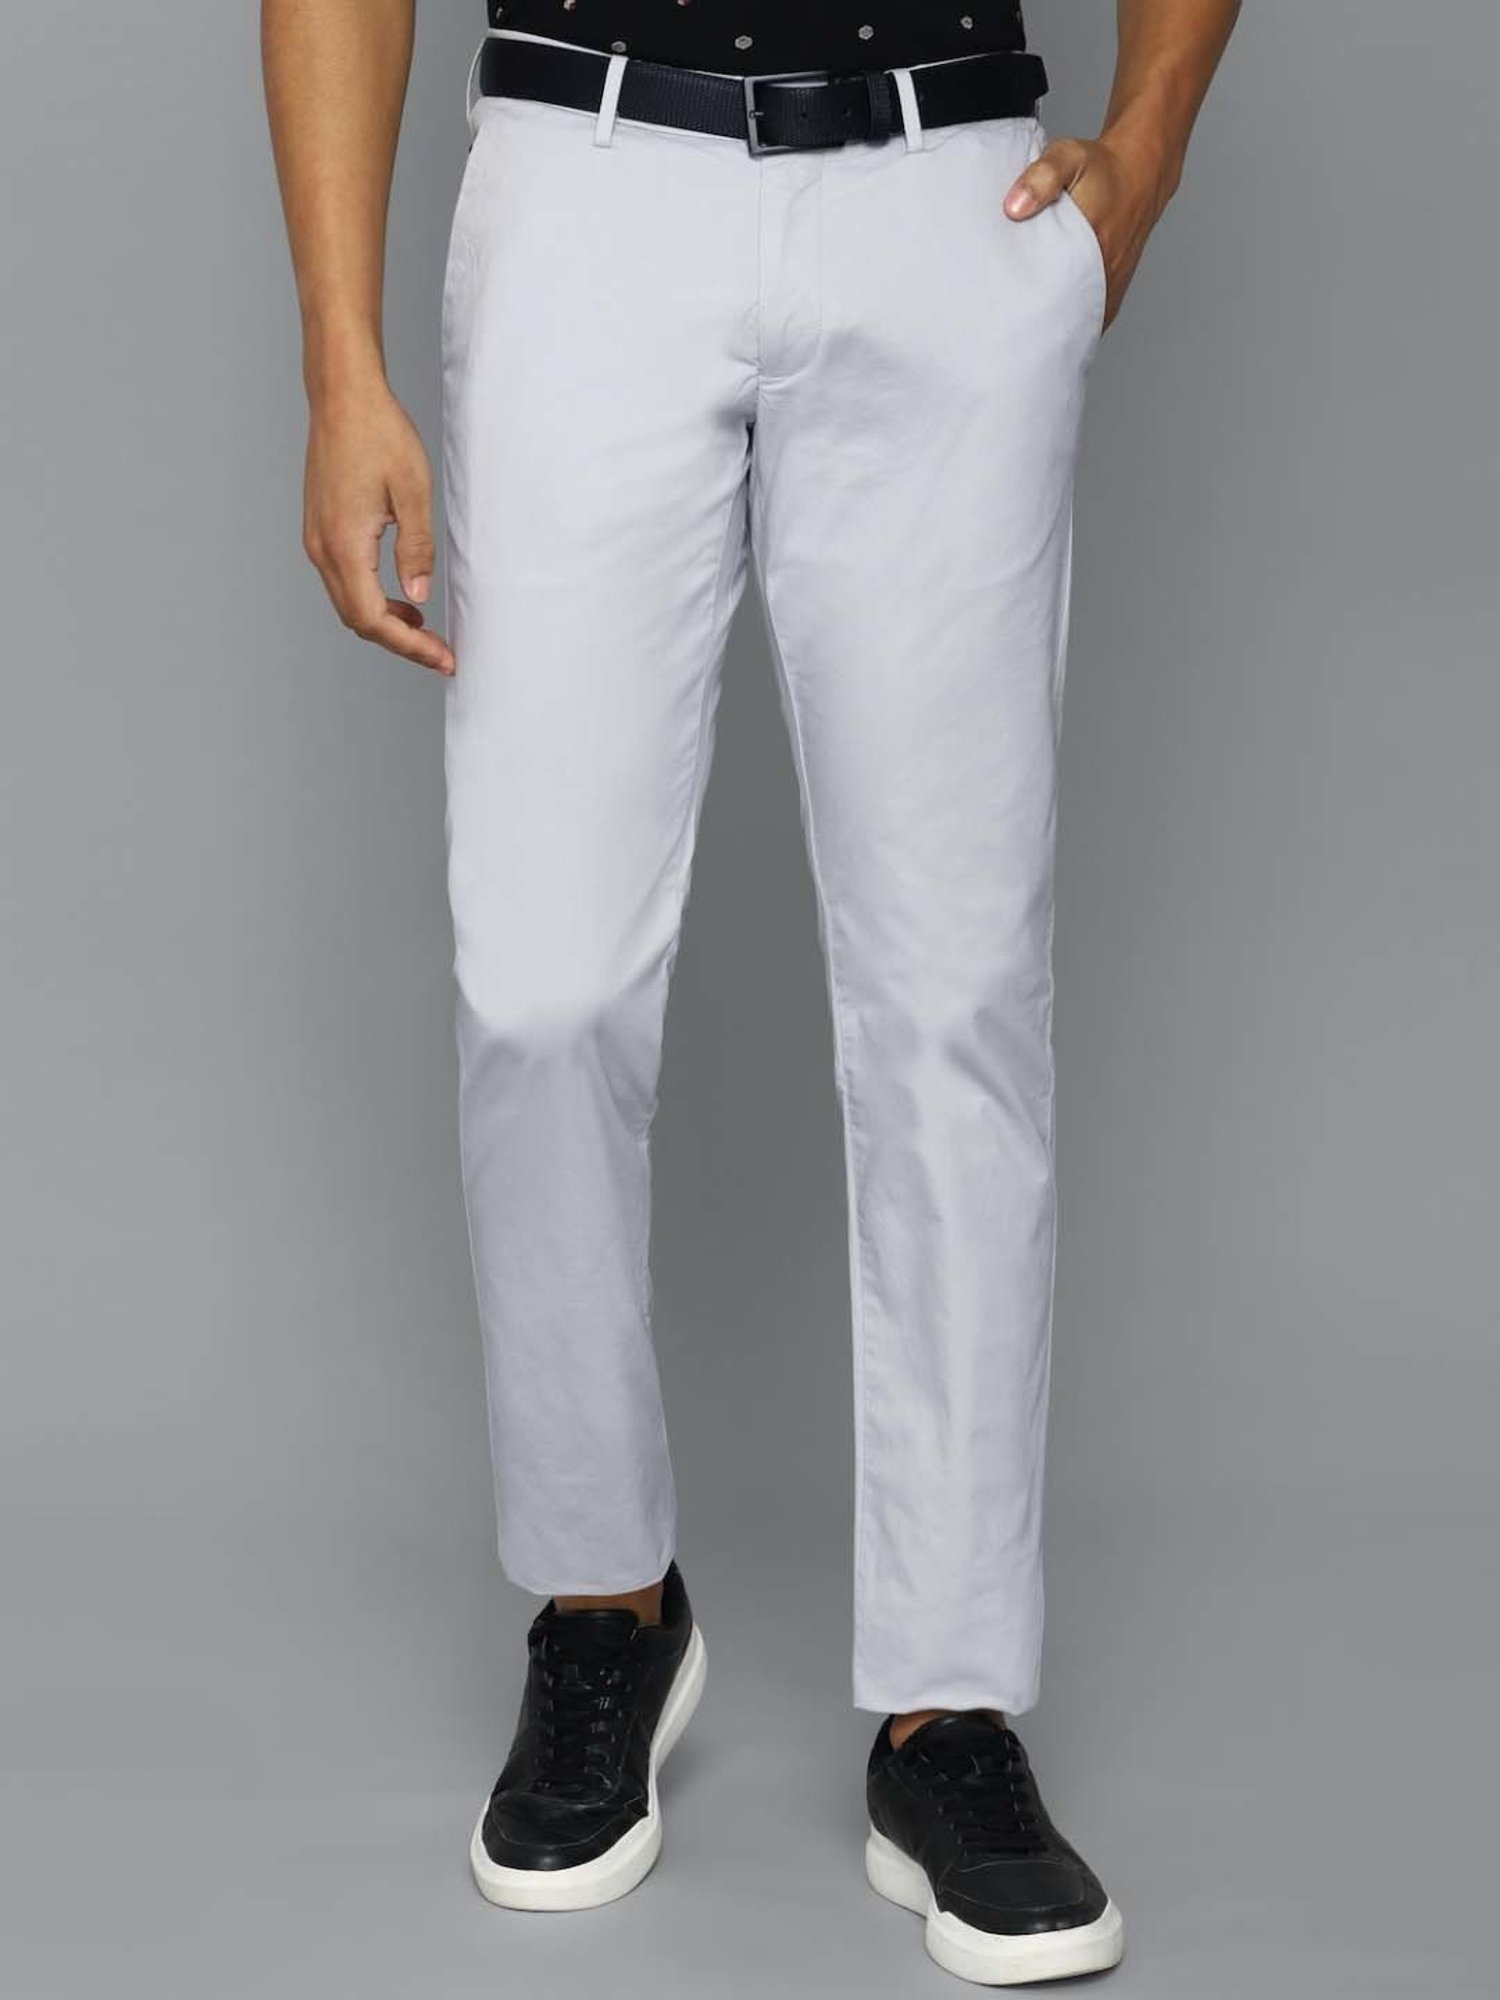 Allen Solly Grey Trousers Buy Allen Solly Grey Trousers Online at Best  Price in India  NykaaMan